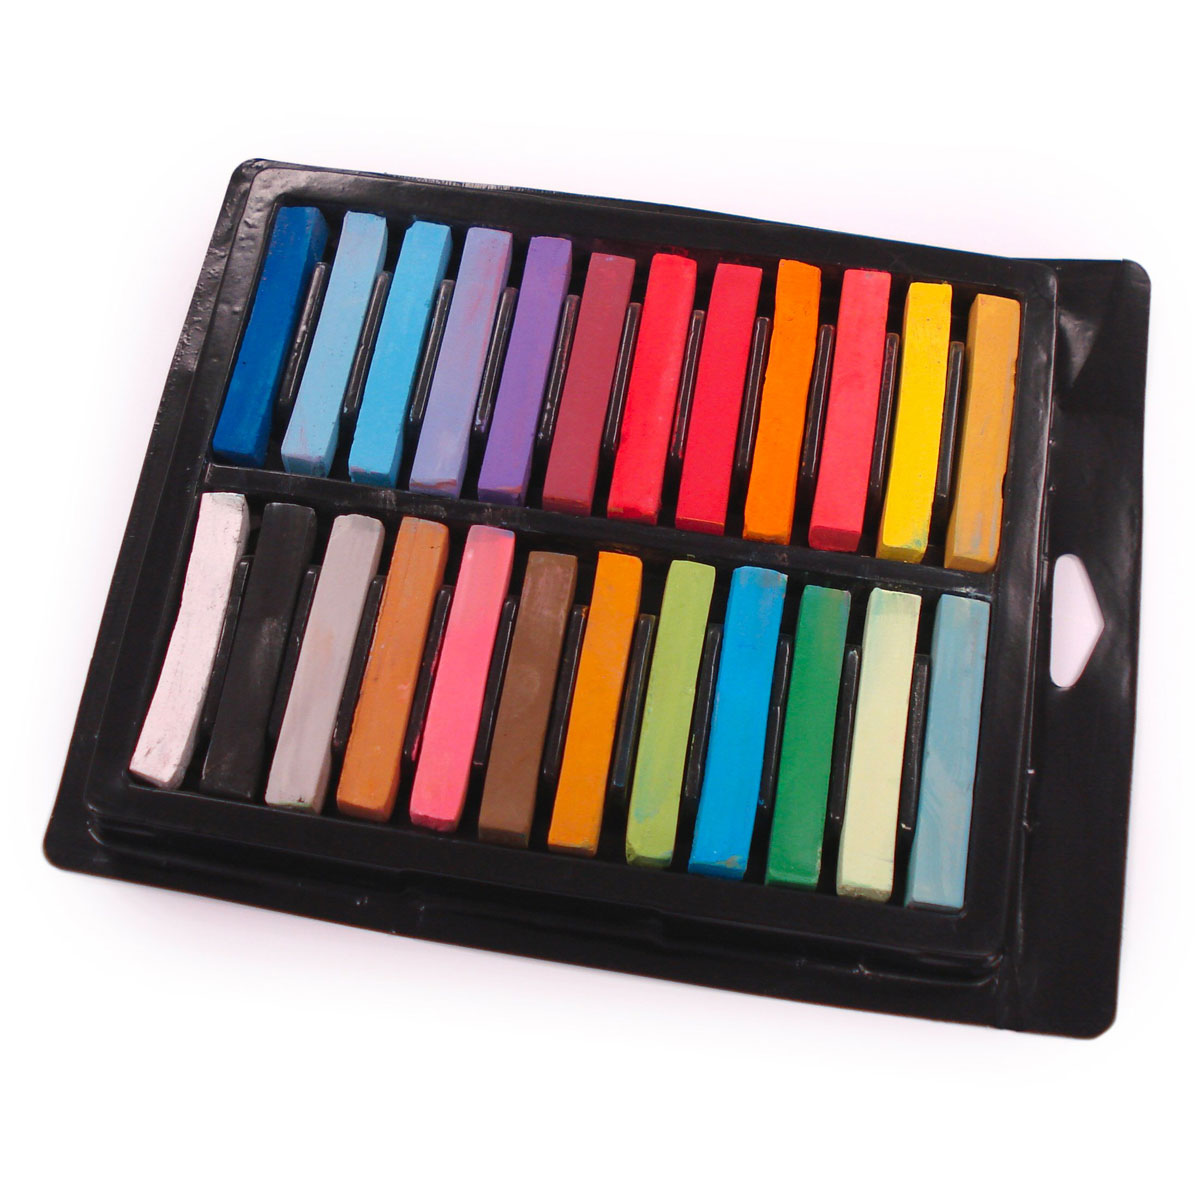 What Are Pastels? A Beginners Guide To This Amazing Medium